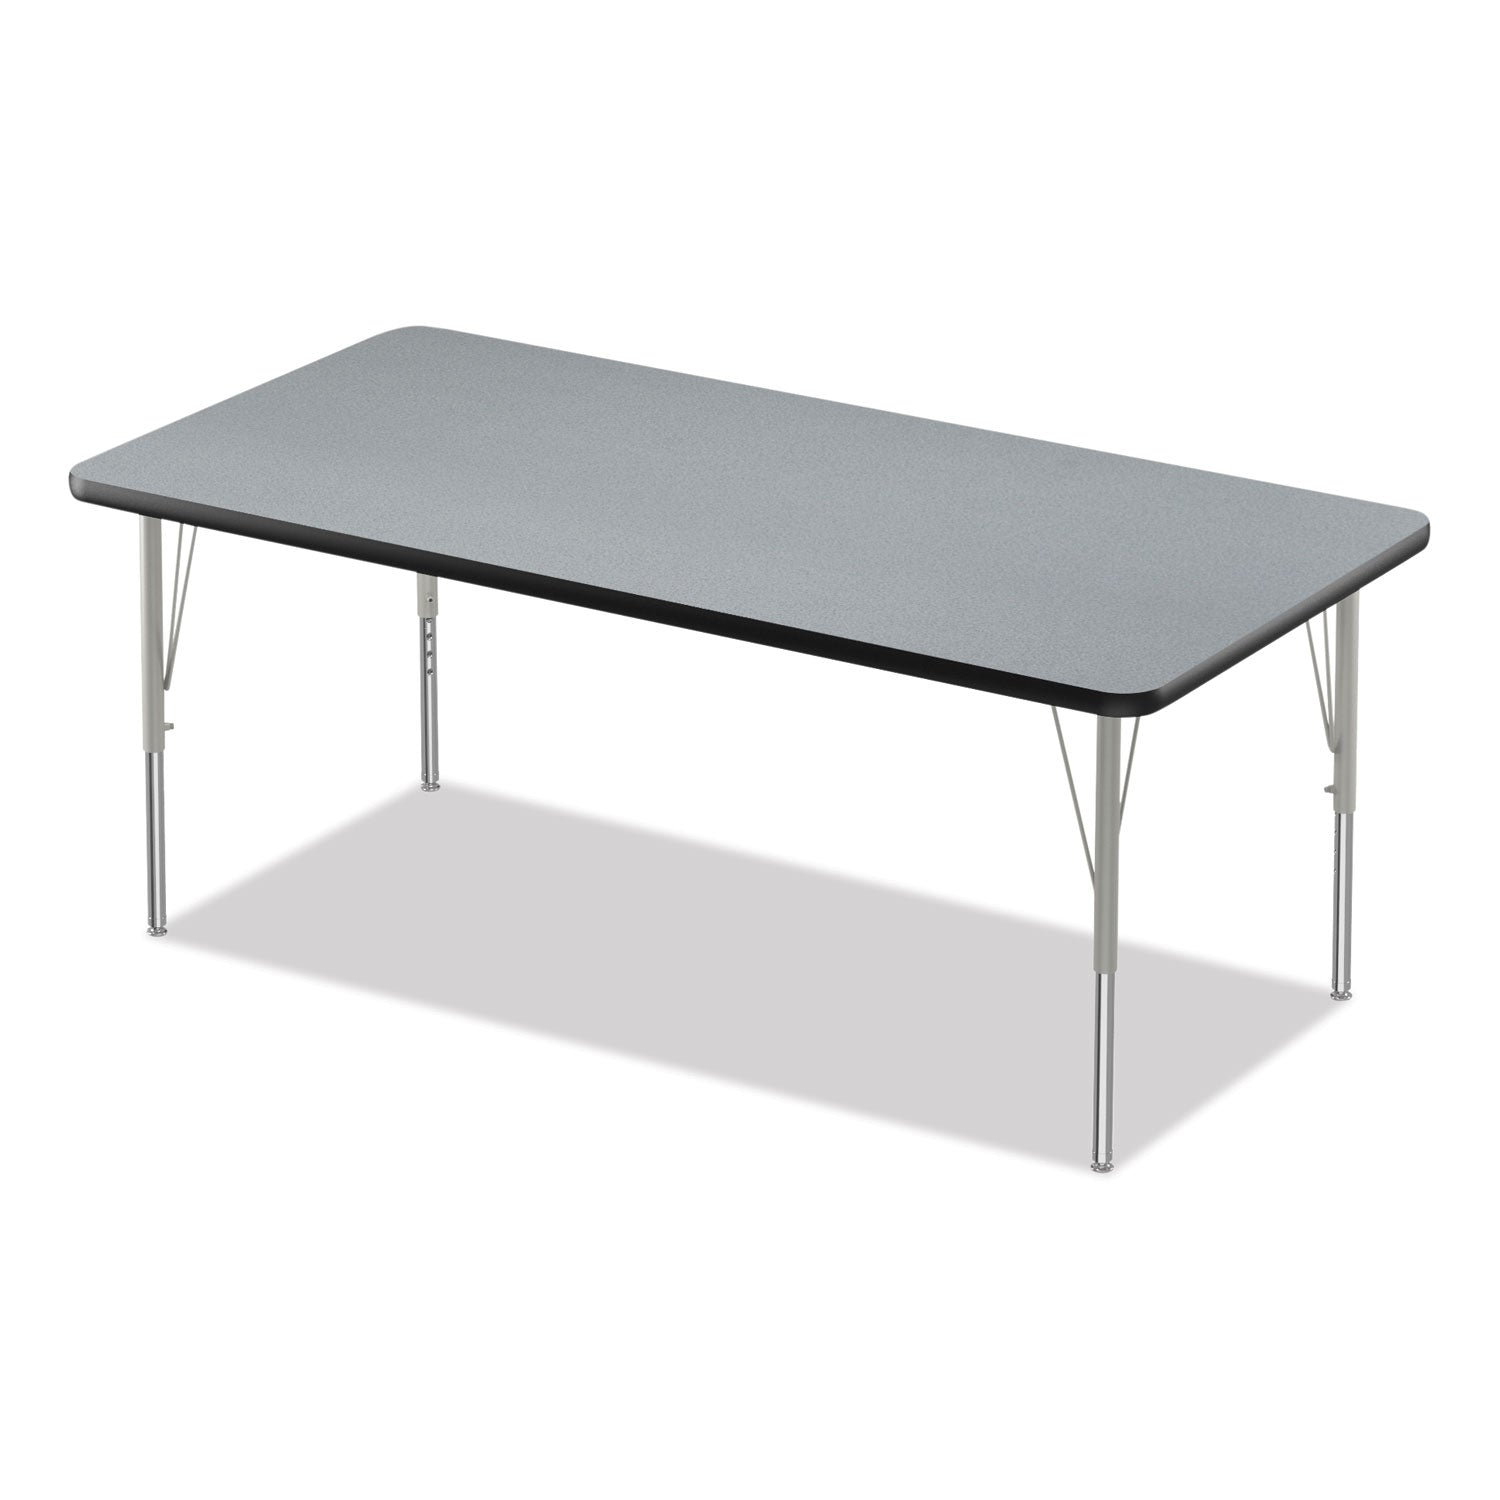 adjustable-activity-table-rectangular-60-x-30-x-19-to-29-granite-top-black-legs-4-pallet-ships-in-4-6-business-days_crl3060tf15954p - 5